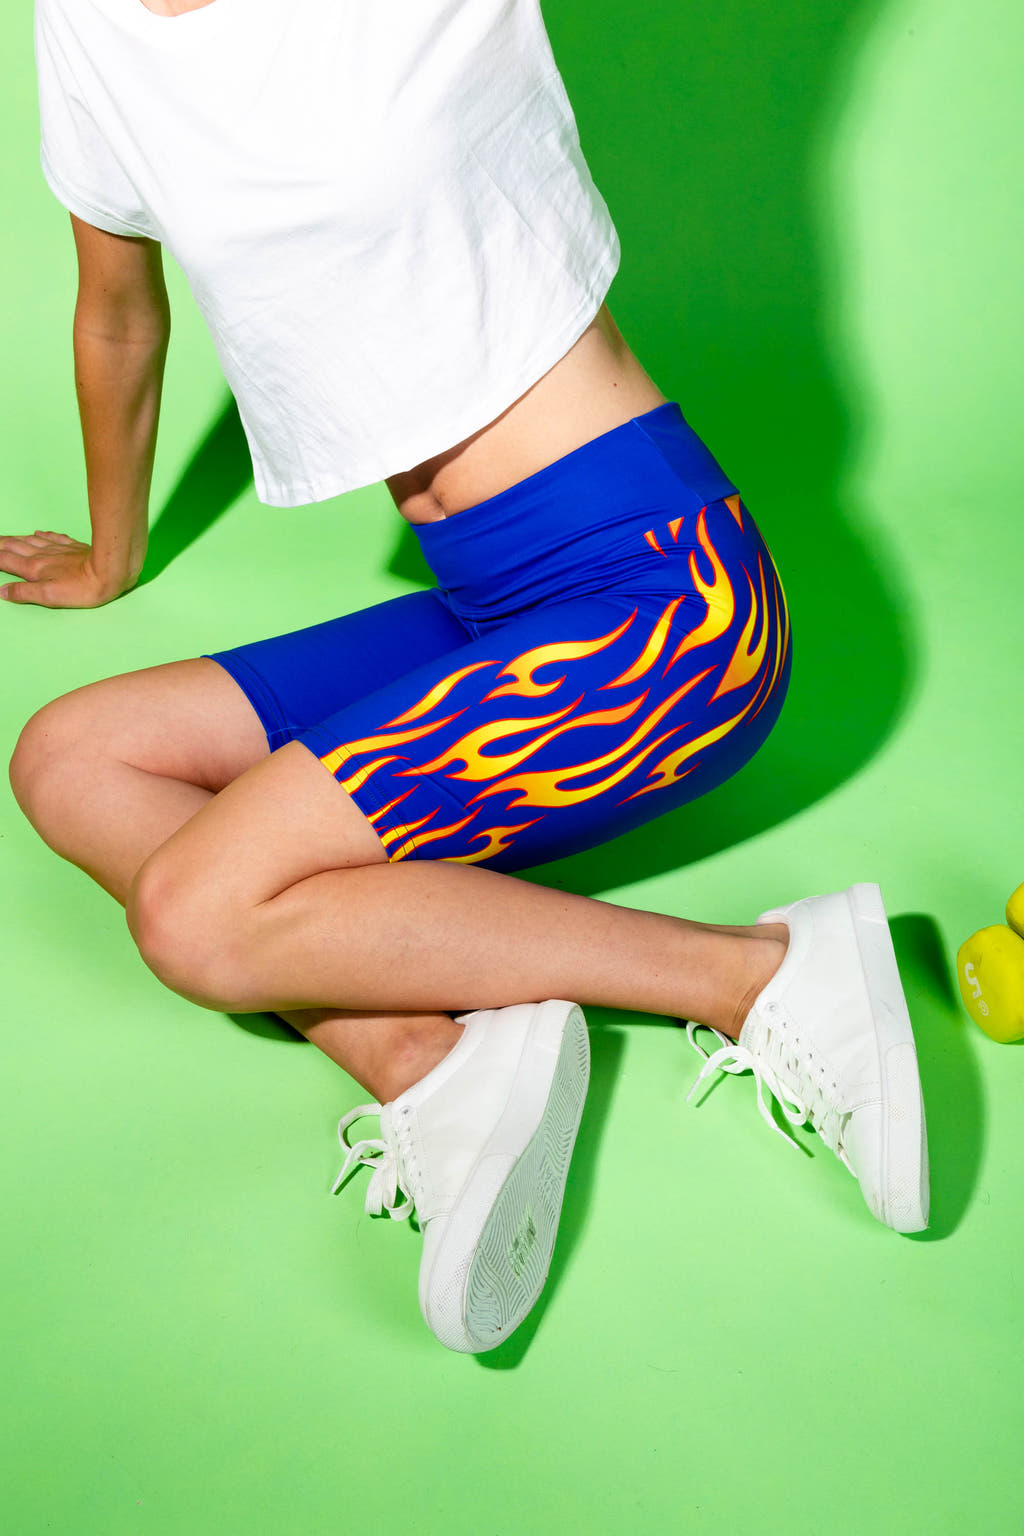 Flaming stretchy shorts for women